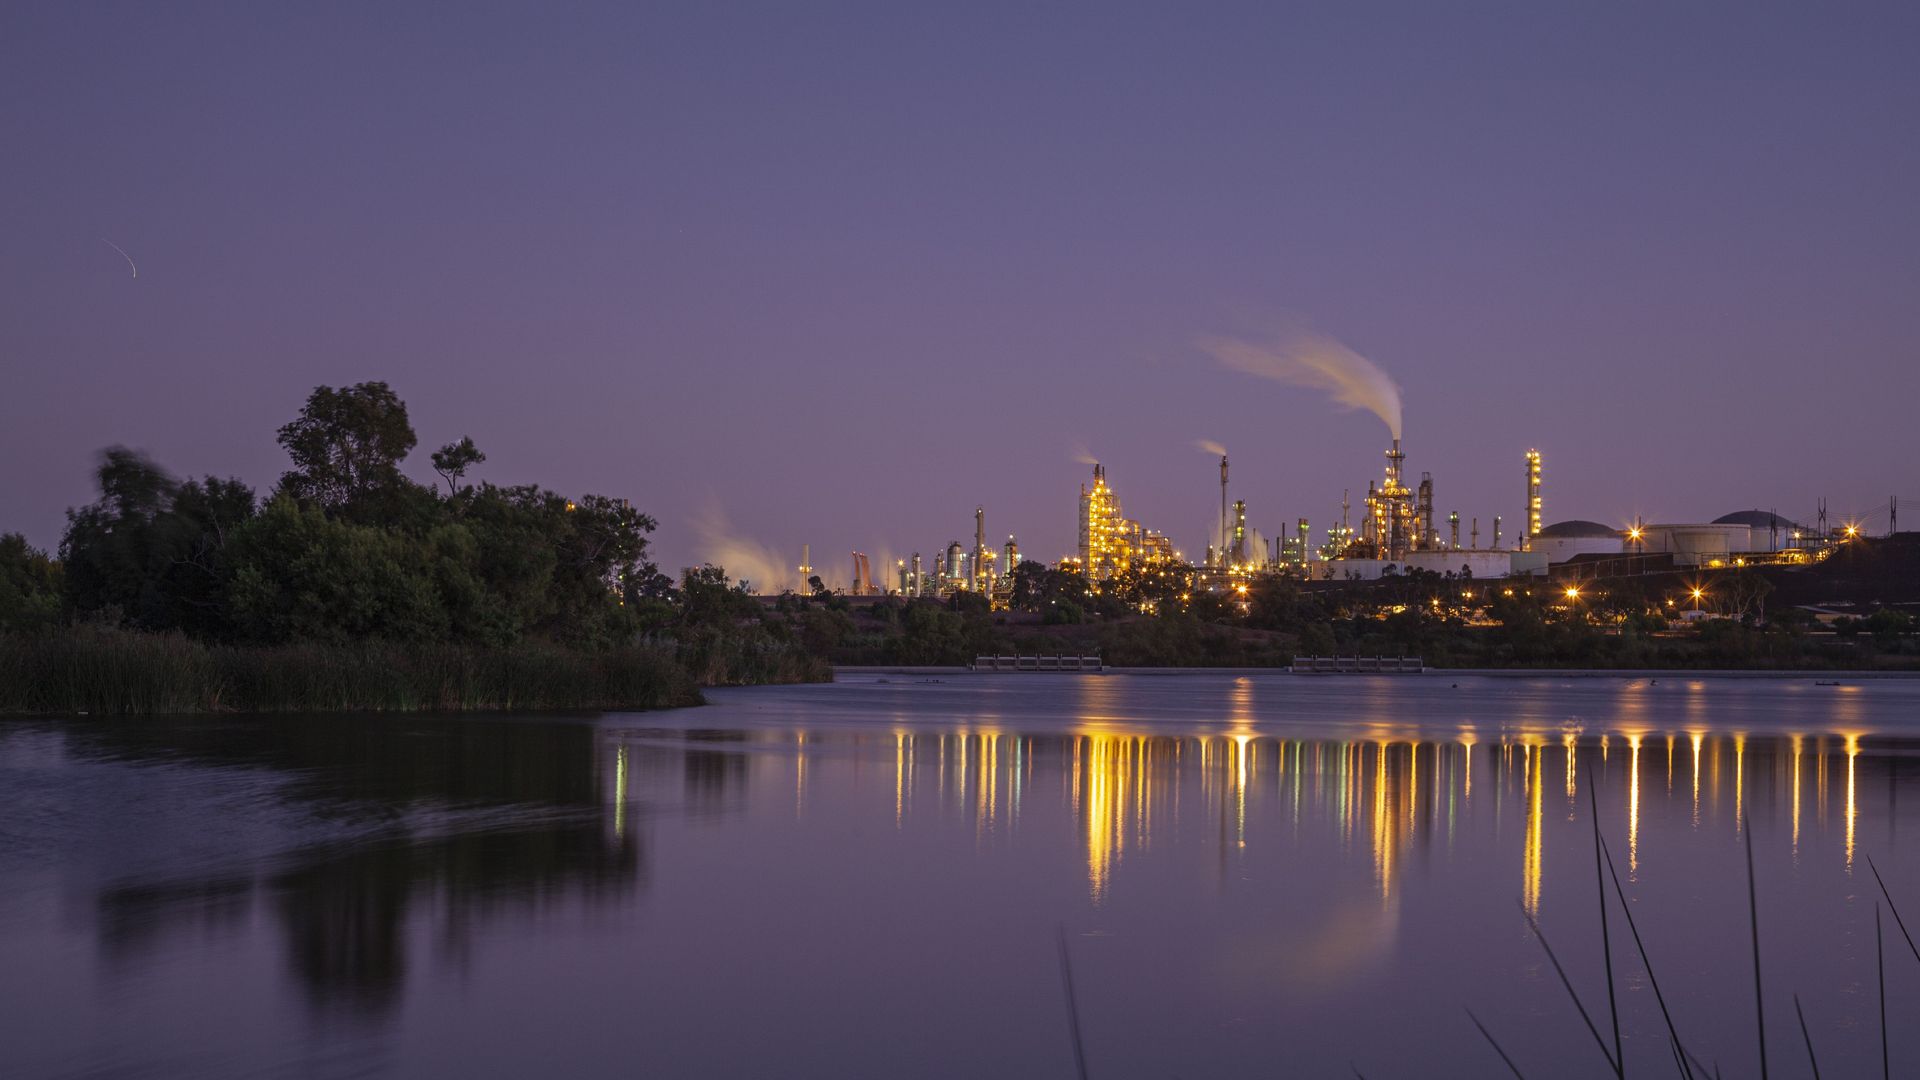 Oil refinery seen at night, reflected in water.